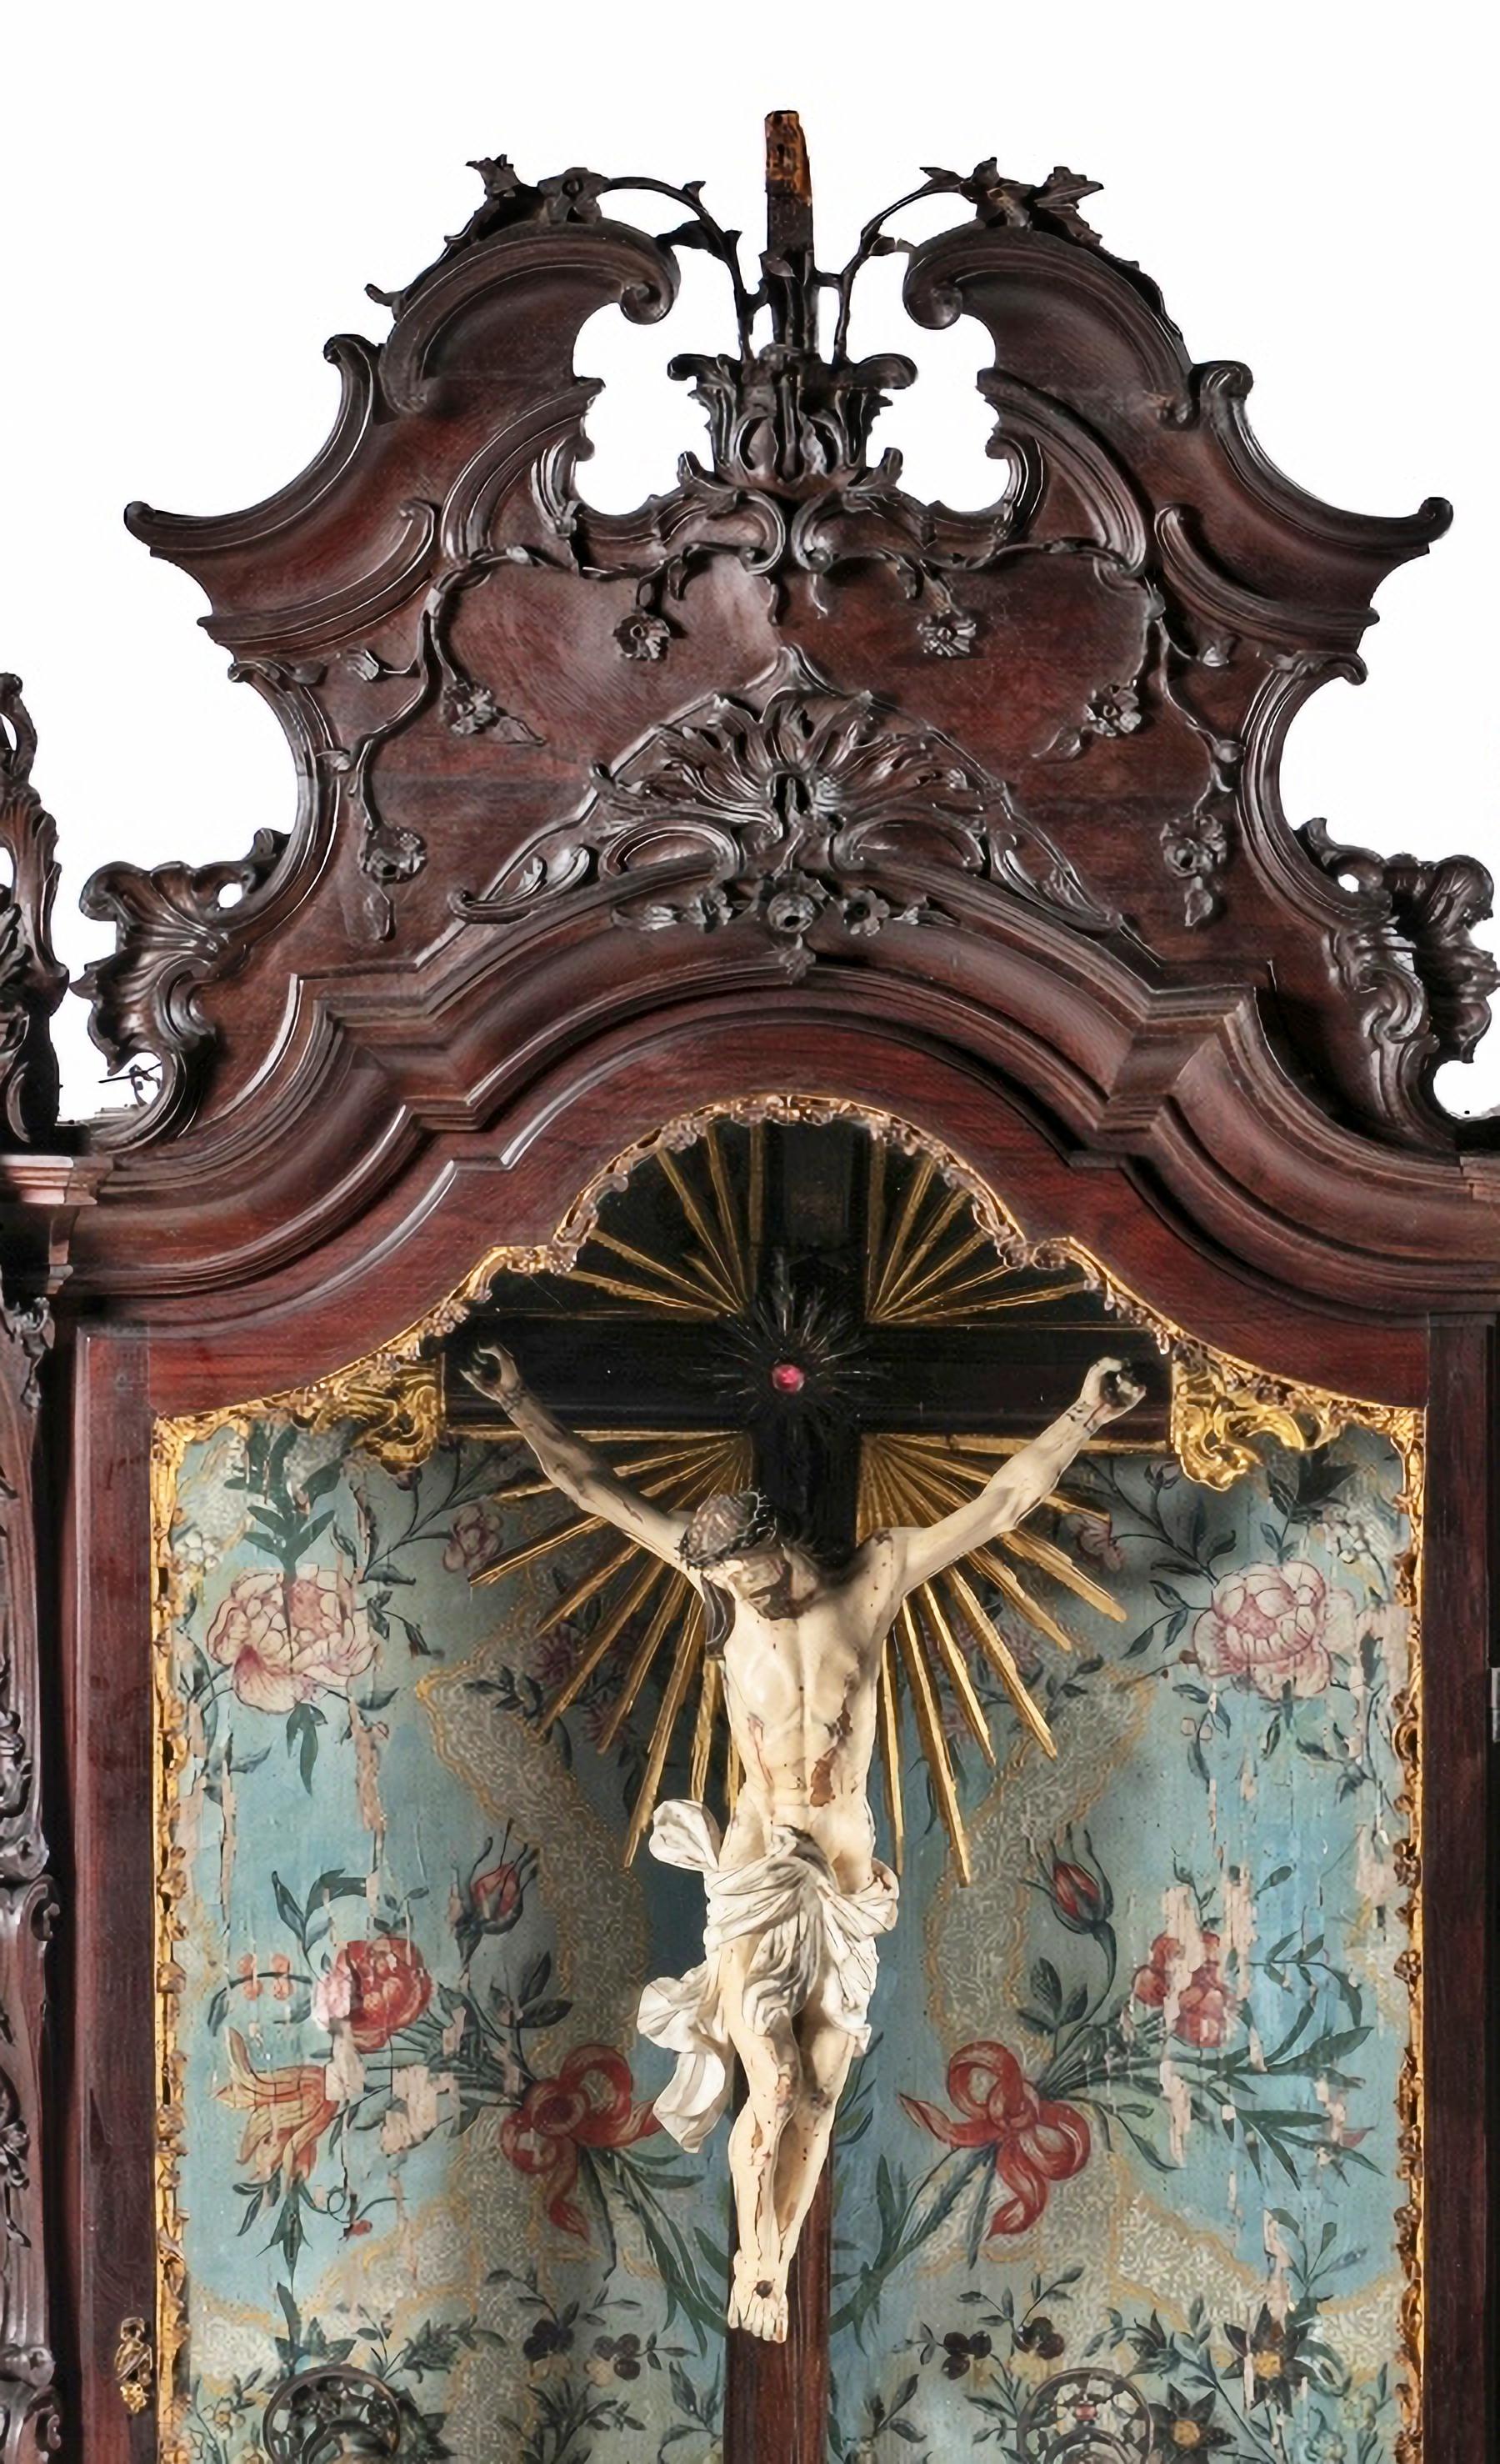 Baroque IMPORTANT PORTUGUESE ORATORY WITH CALVARY 18th Century For Sale